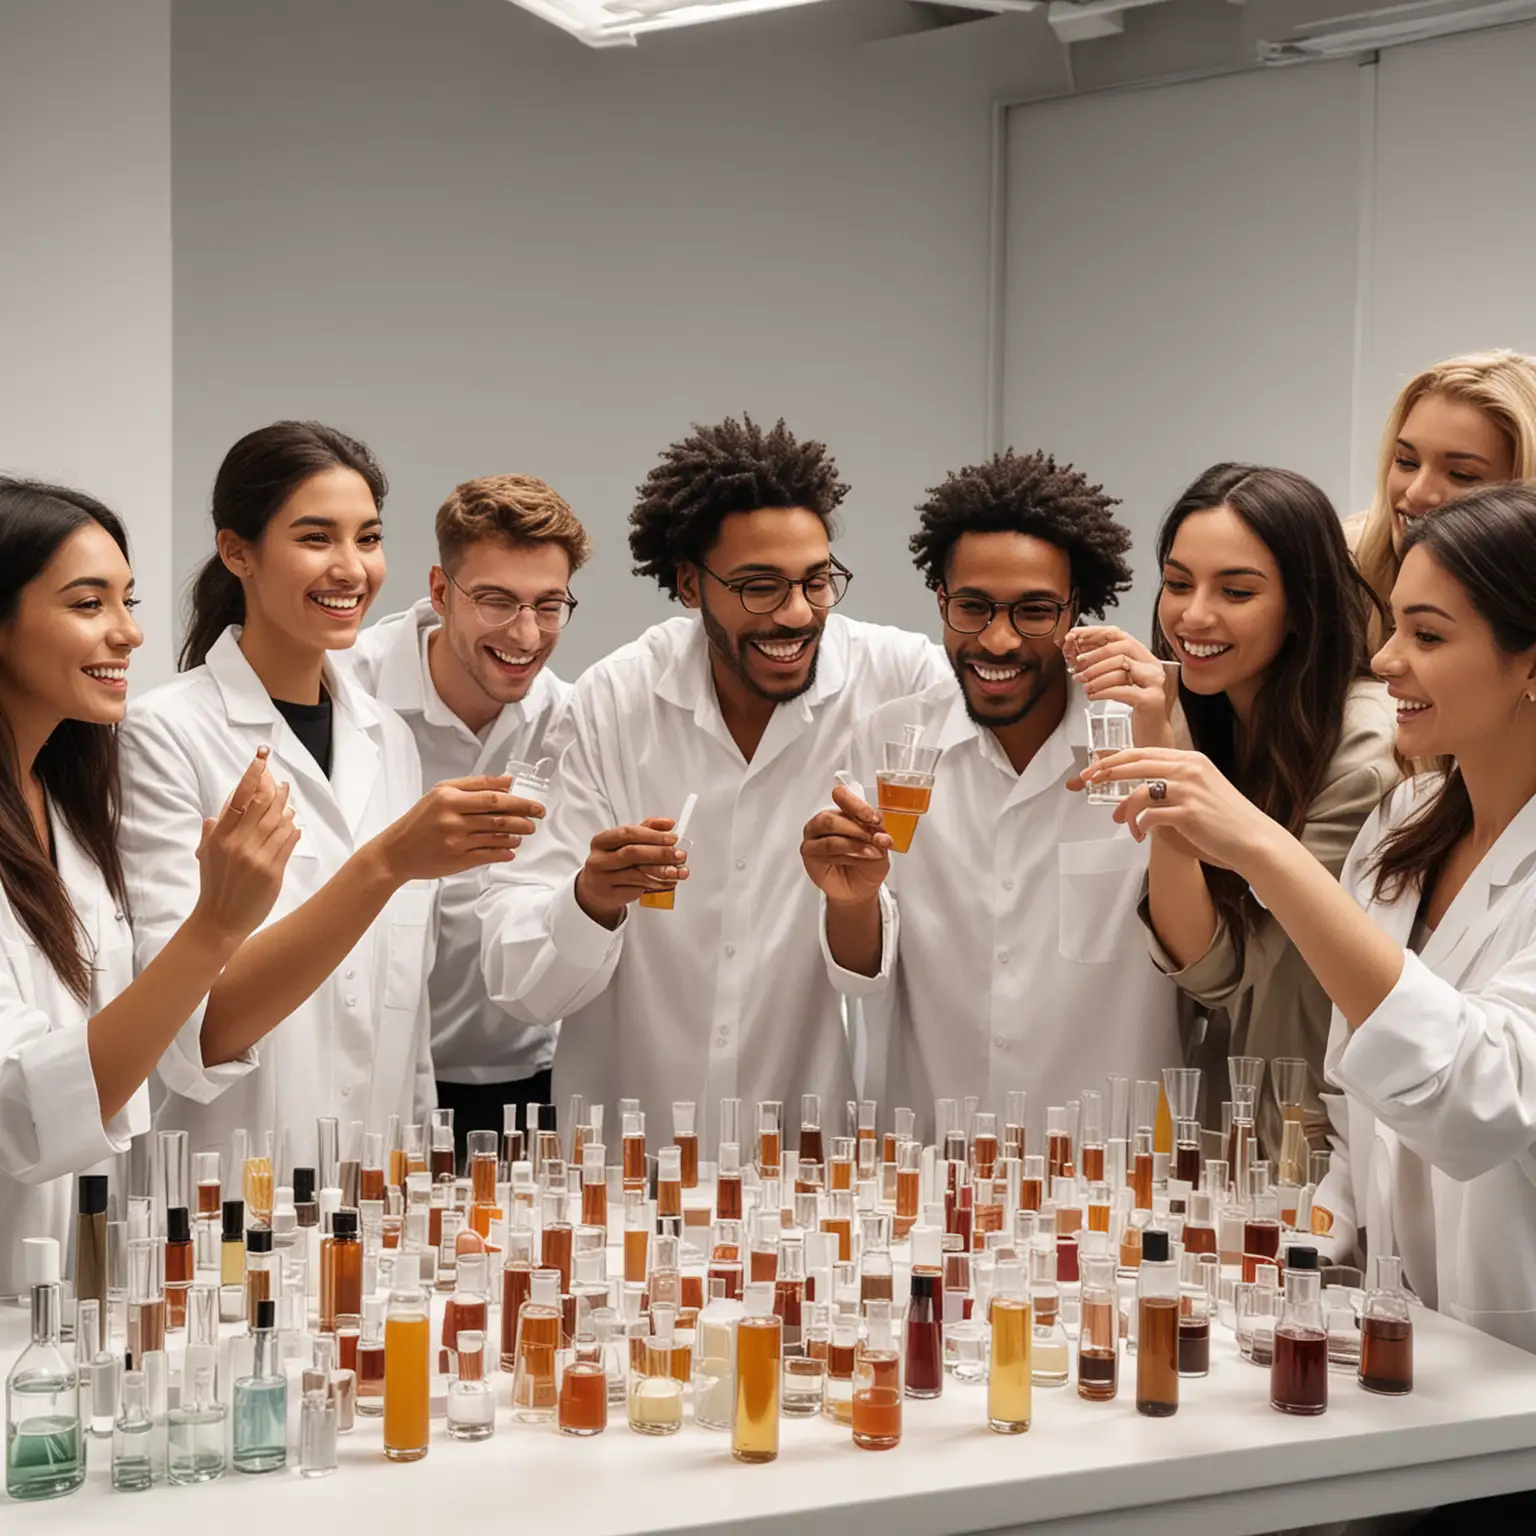 create a group of men and women of various ethnicities having fun sampling fragrance beaker bottles in a fragrance lab